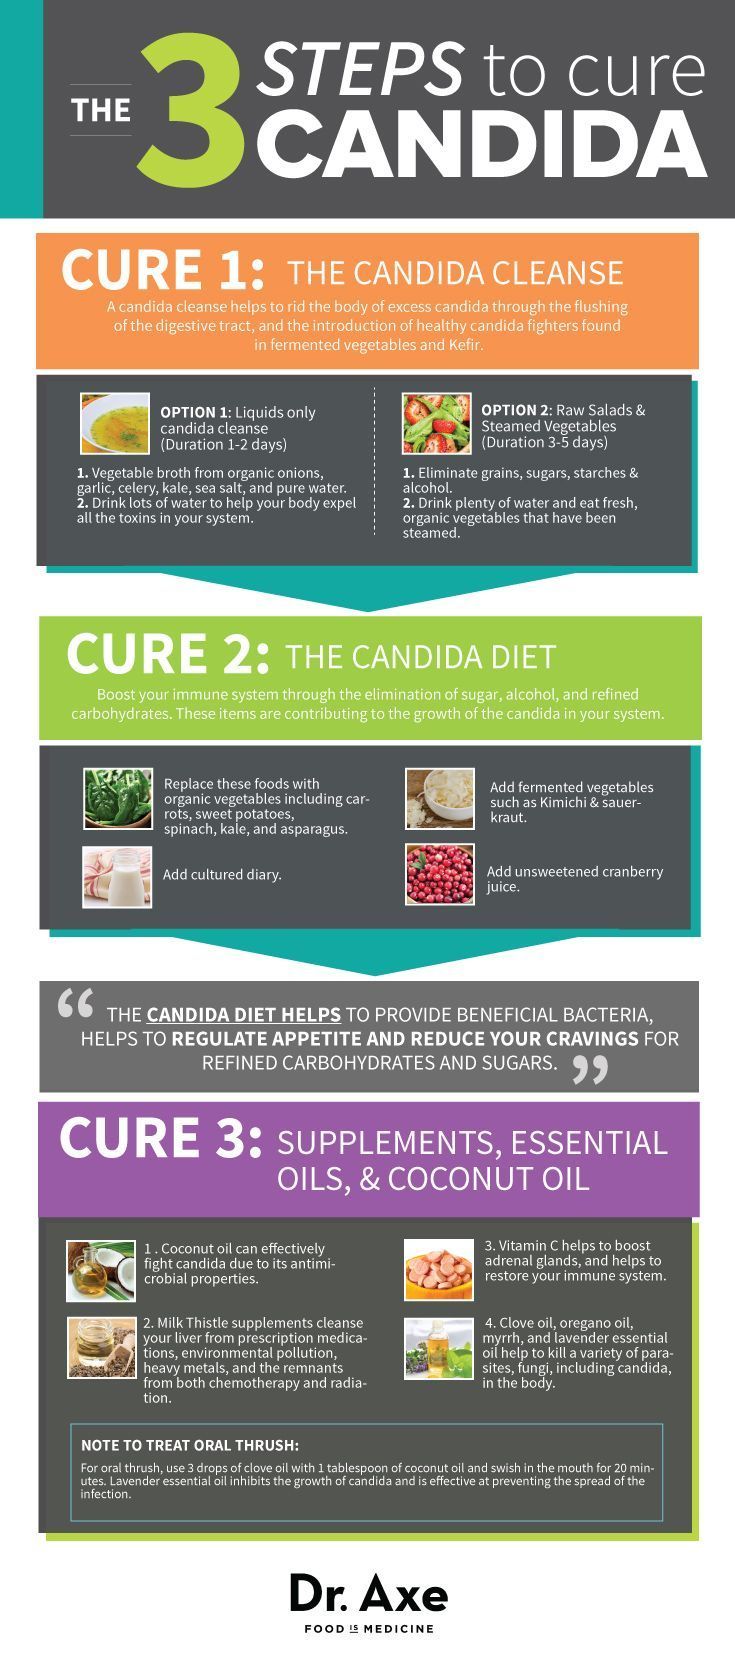 9 Candida Symptoms & 3 Steps To Cure It  I love Dr. Axe, but still not sure on candida diet. Research in progress!